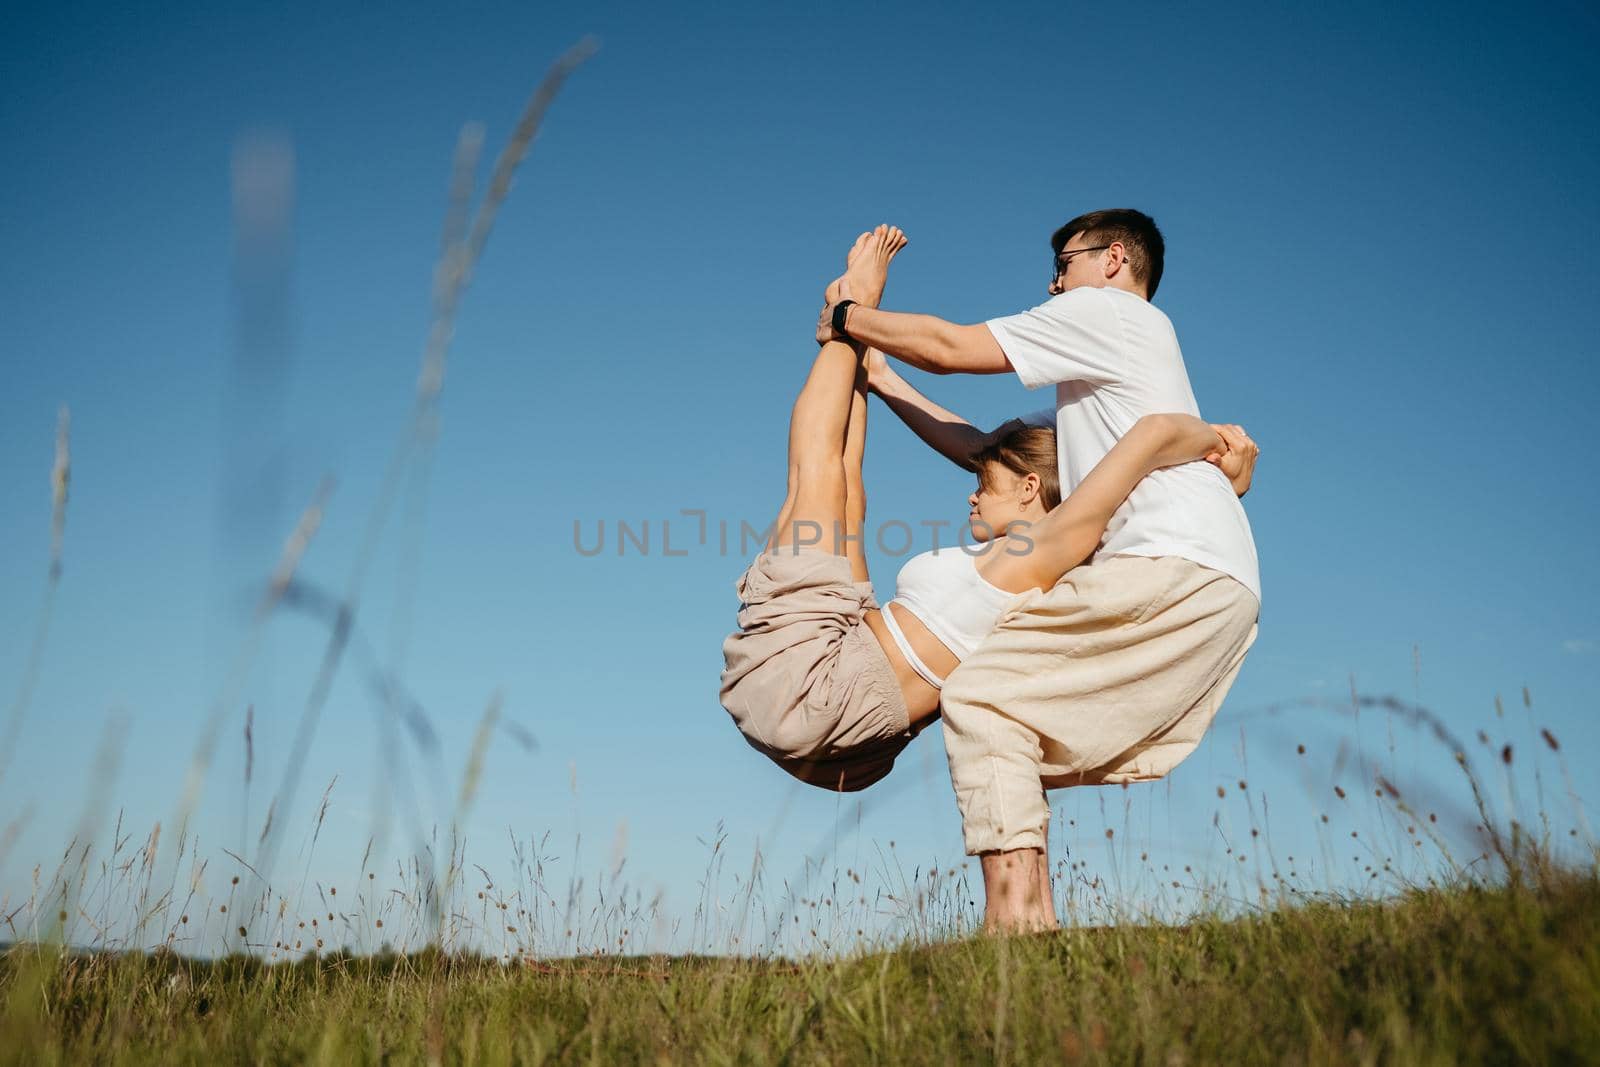 Man and Woman Dressed Alike Doing Difficult Pose While Practicing Yoga Outdoors in the Field with Blue Sky on the Background by Romvy